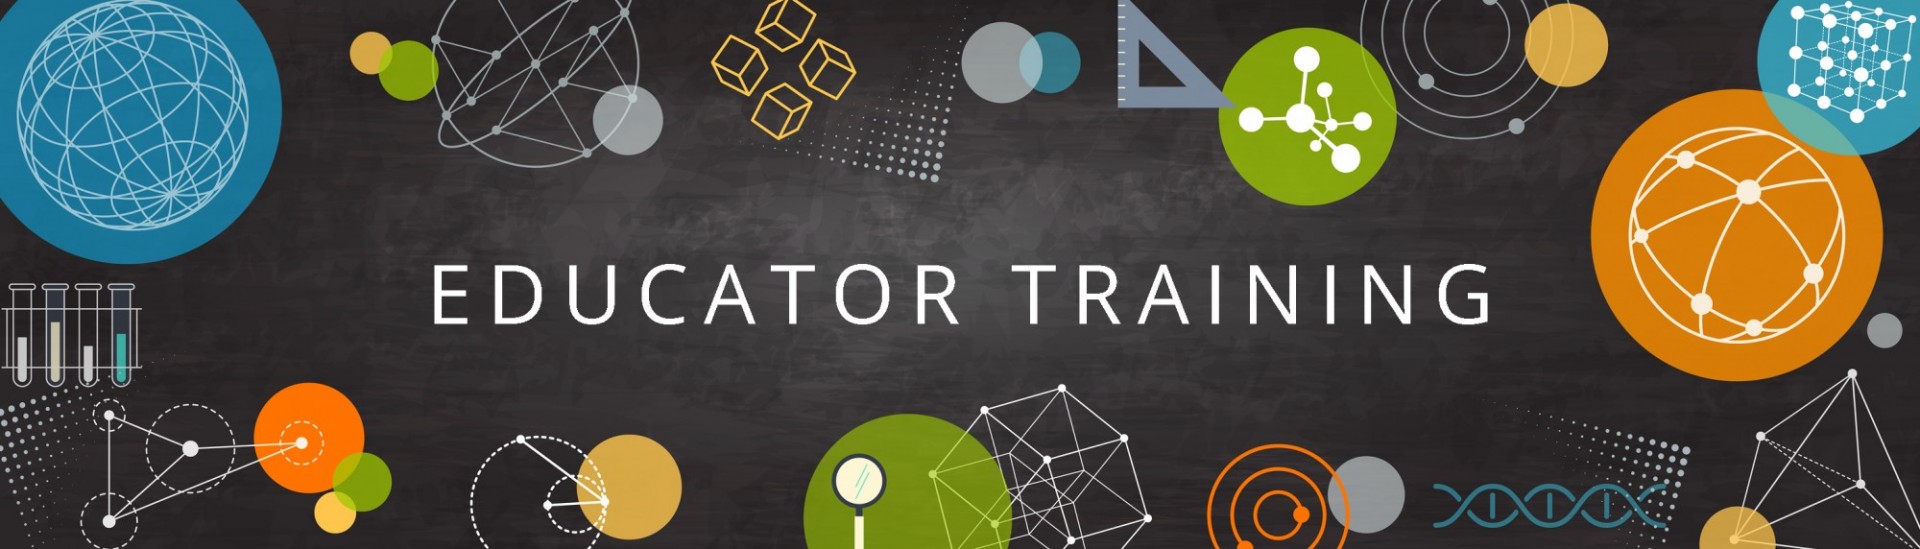 black background with science illustrations and white text saying, "Educator Training"